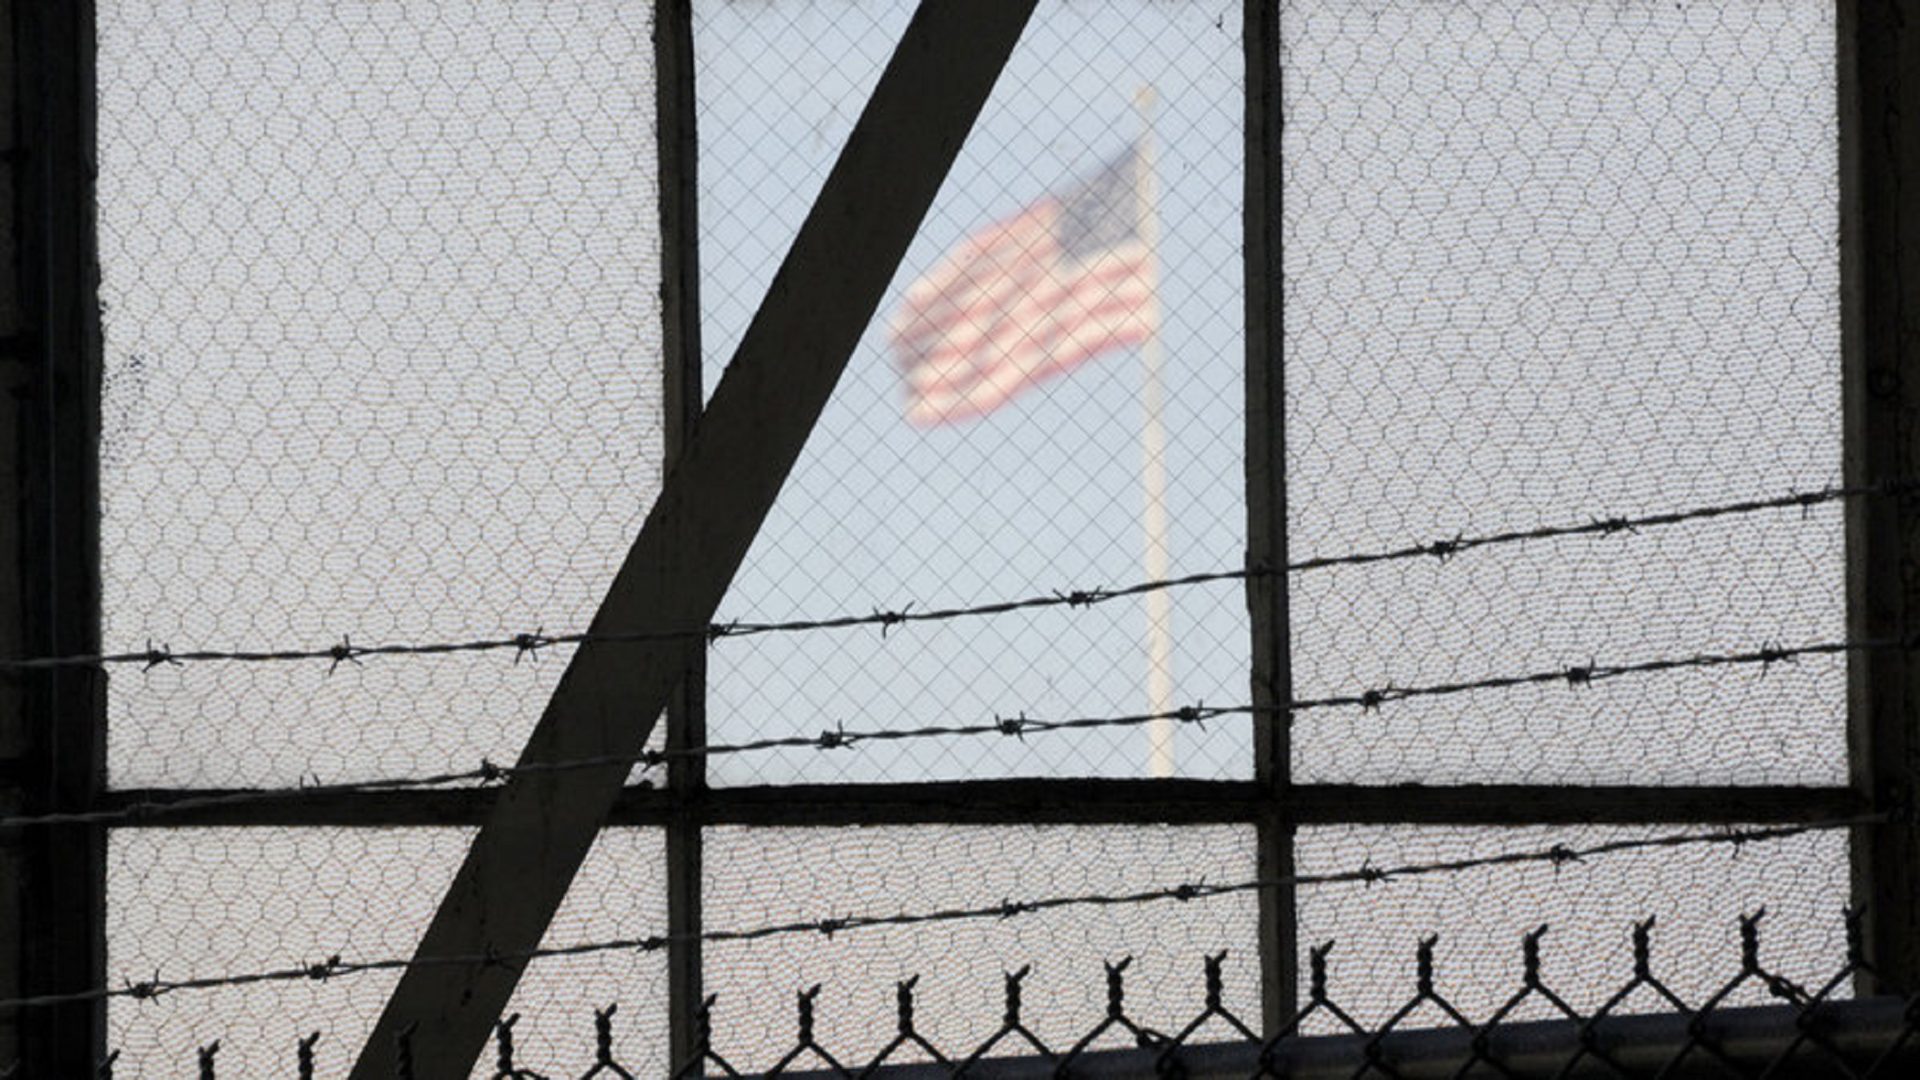 An NPR investigation finds that the military court and prison at GuantÃ¡namo Bay, Cuba, have cost taxpayers billions of dollars, with billions more expected. Above, an American flag is seen through the war crimes courtroom at the U.S. naval base at GuantÃ¡namo Bay on Oct. 17, 2012.